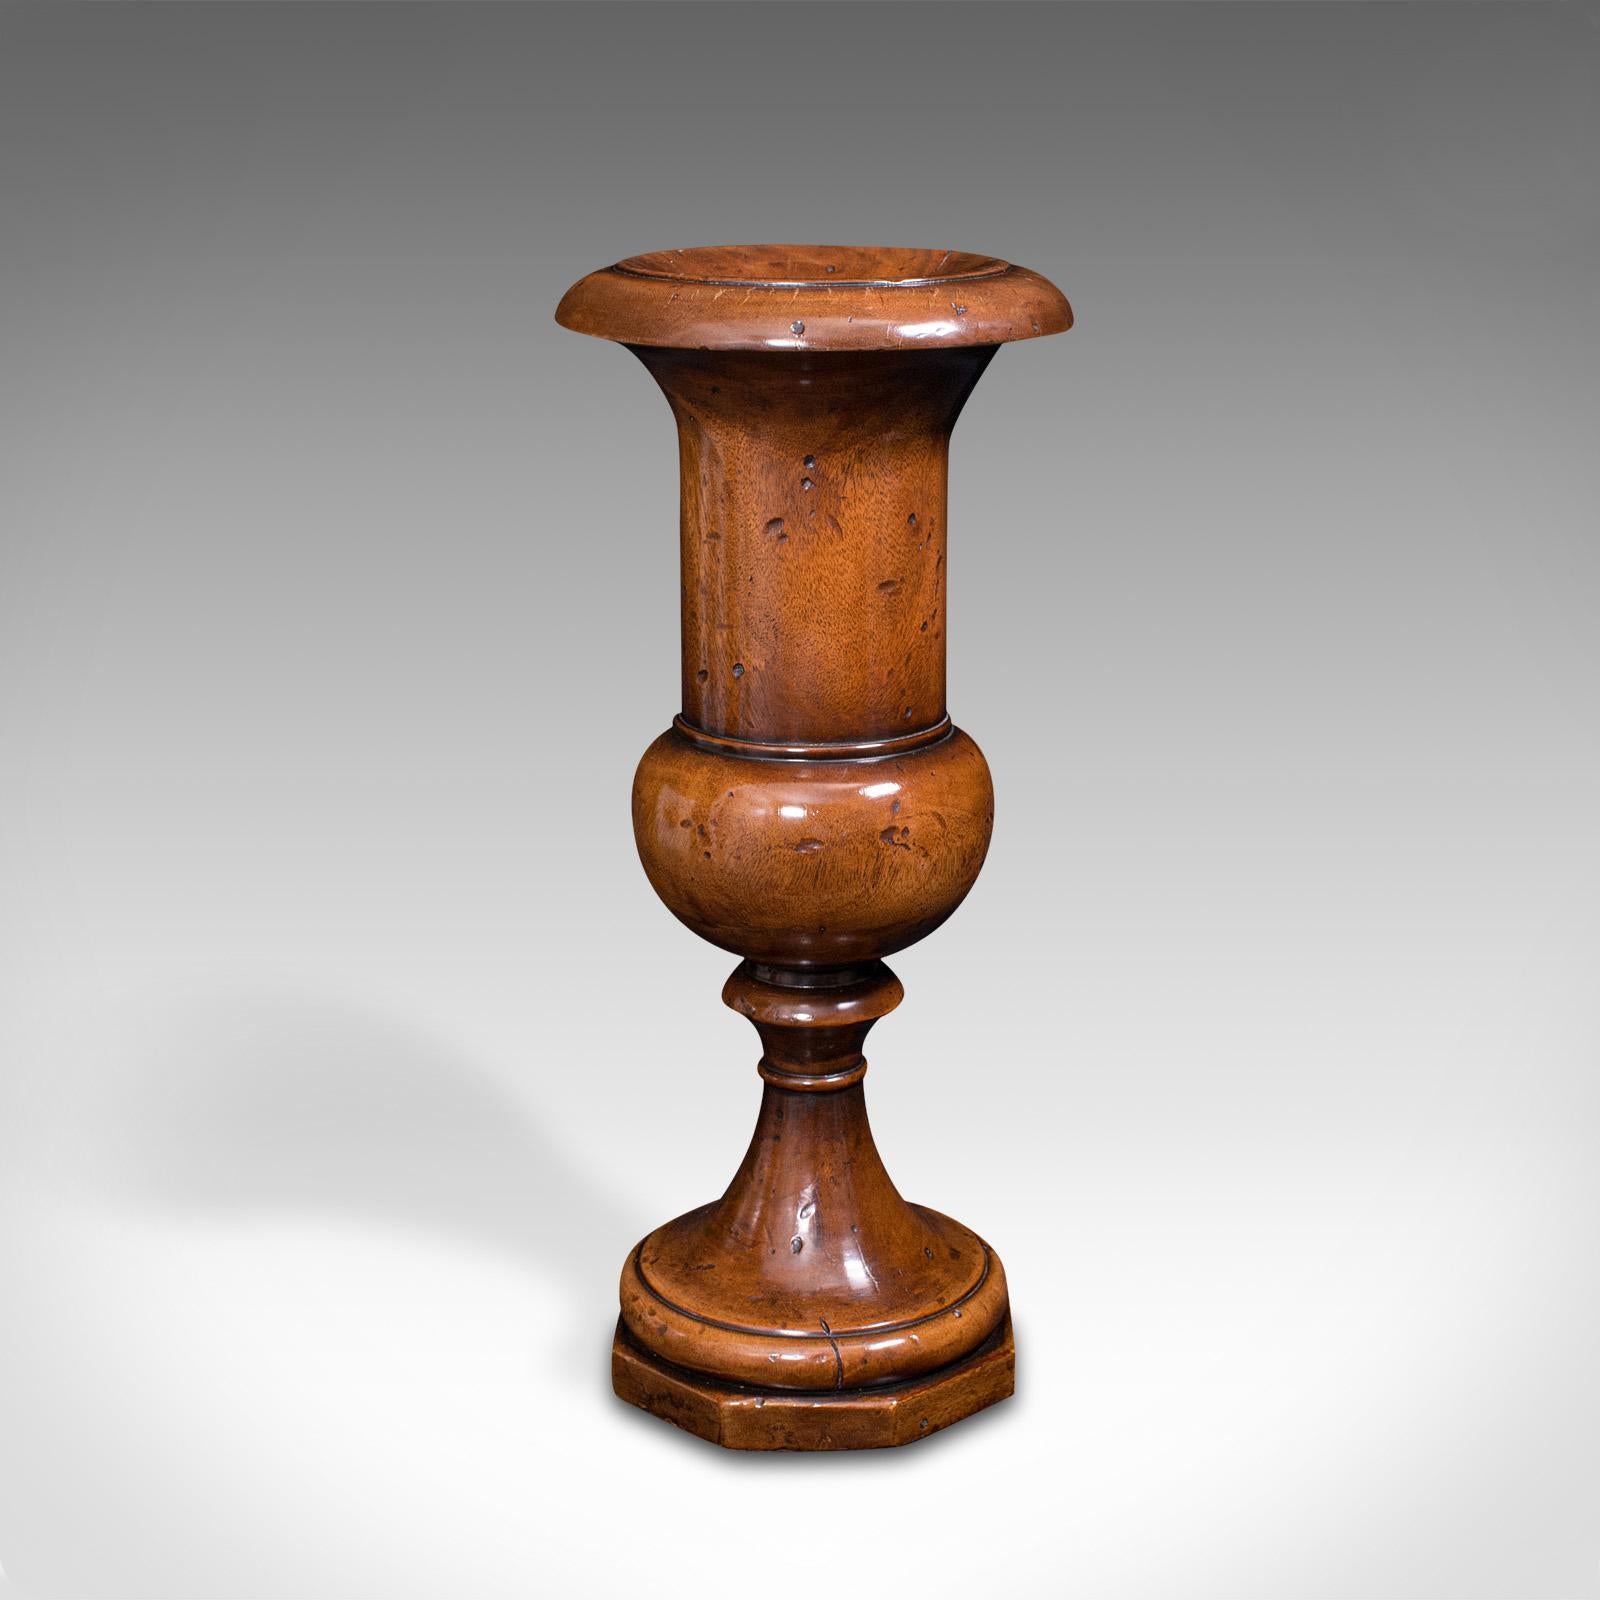 This is a large antique dried stem vase. A French, turned beech display urn, dating to the late Victorian period, circa 1900.

A delight of antique French wood turning - a showcase piece
Displays a desirable aged patina throughout
Select beech